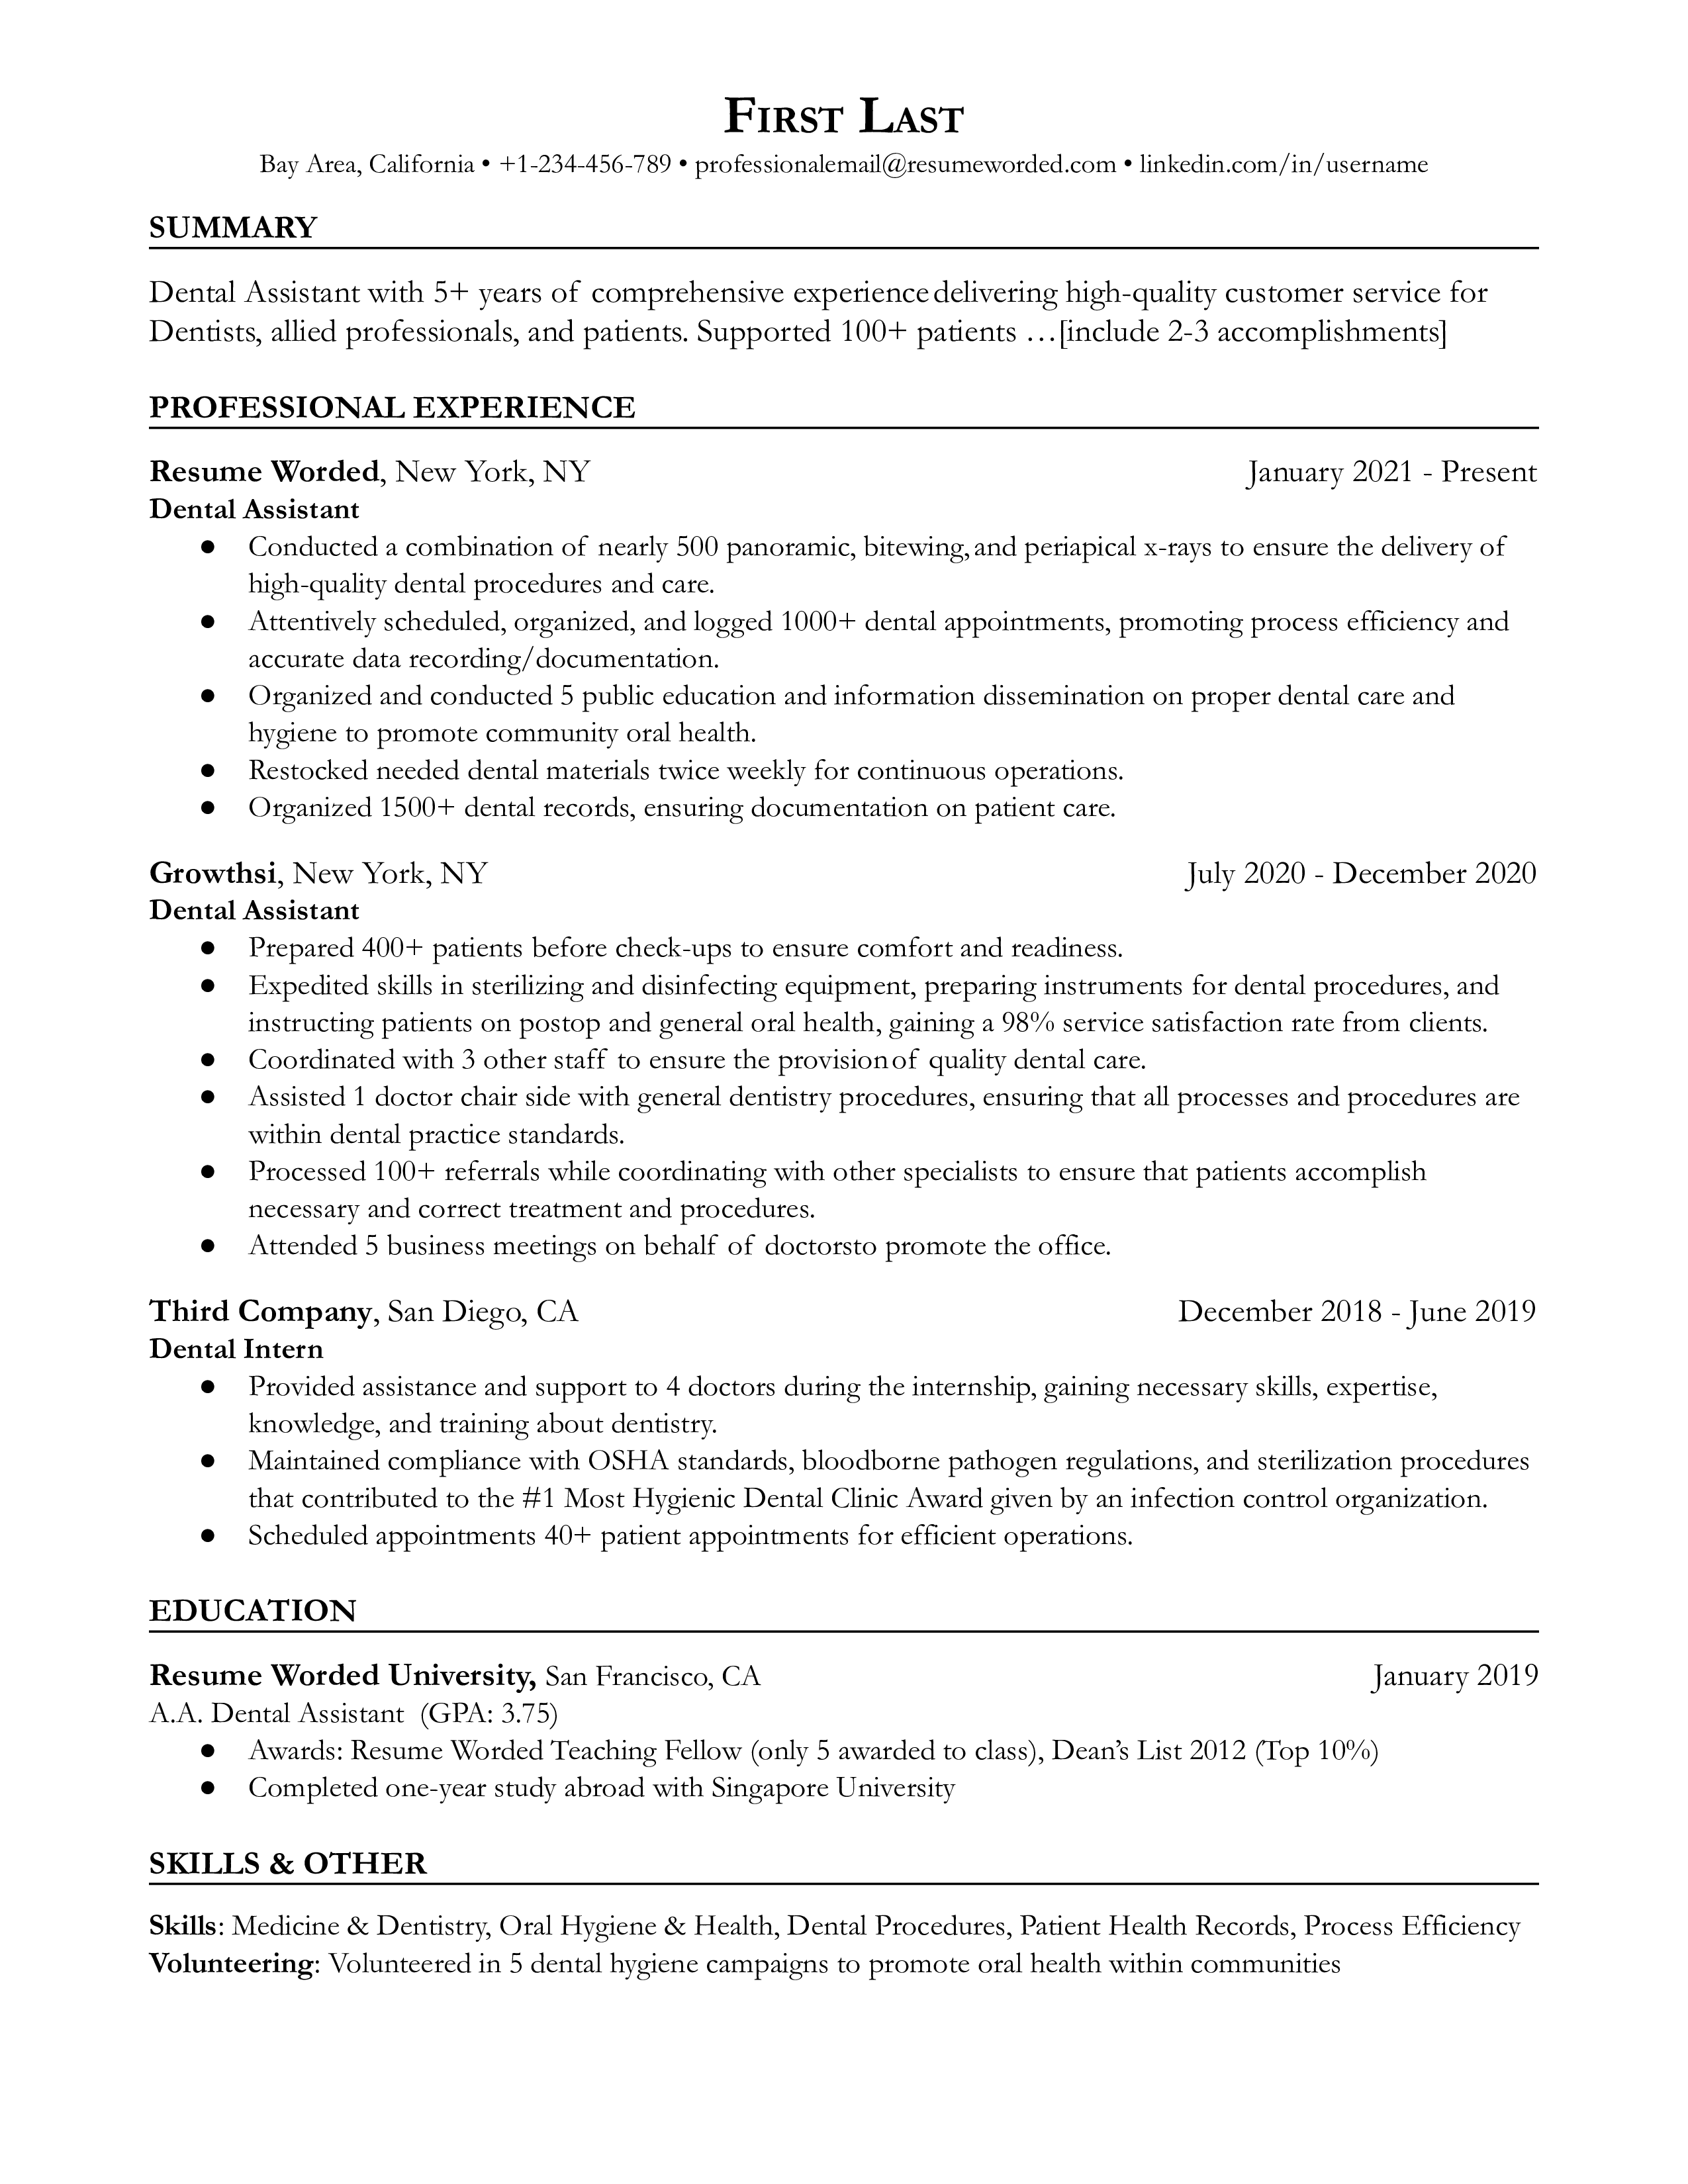 CV screenshot for a dental assistant role, showcasing technical skills and patient care experience.